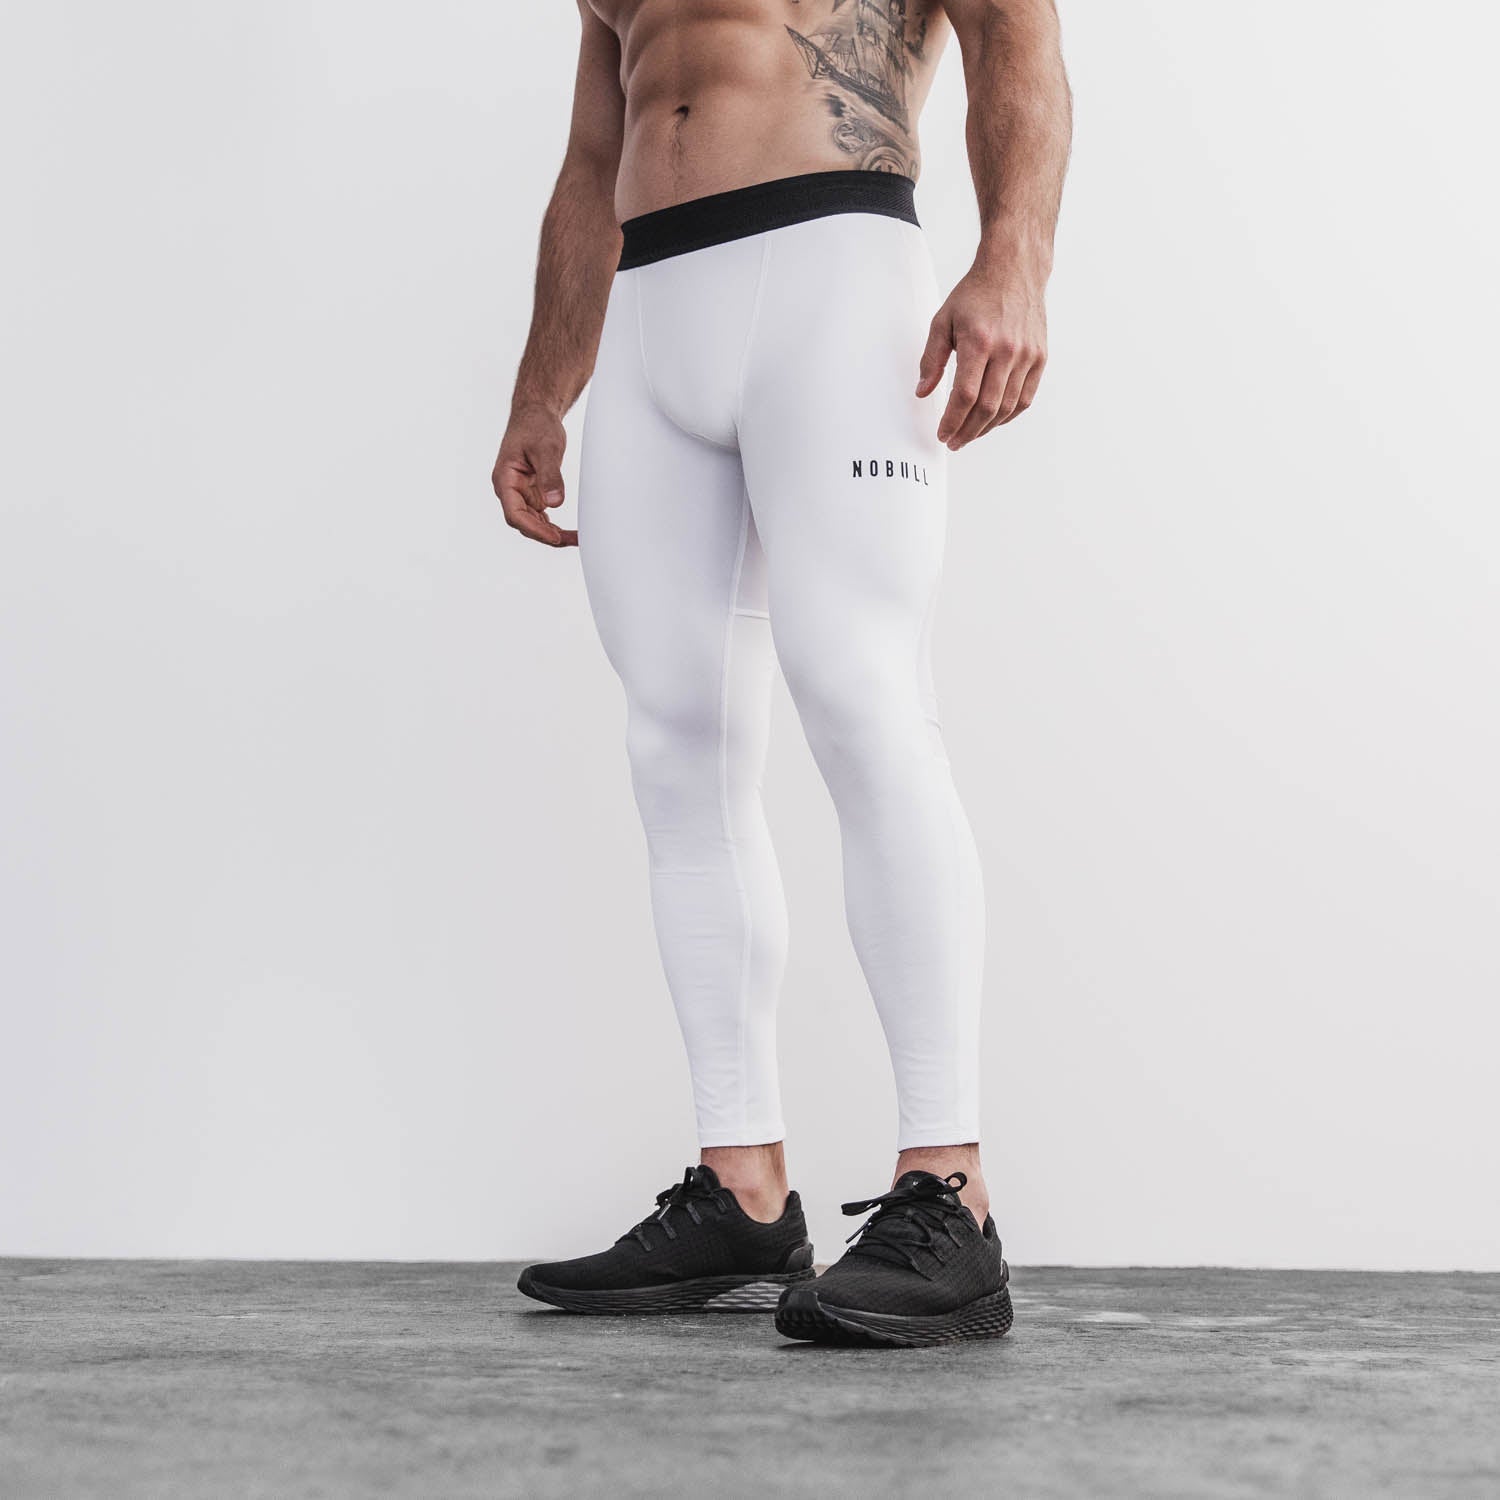 Men's Compression Legging White Gym Wear IRONGEAR Fitness, 51% OFF